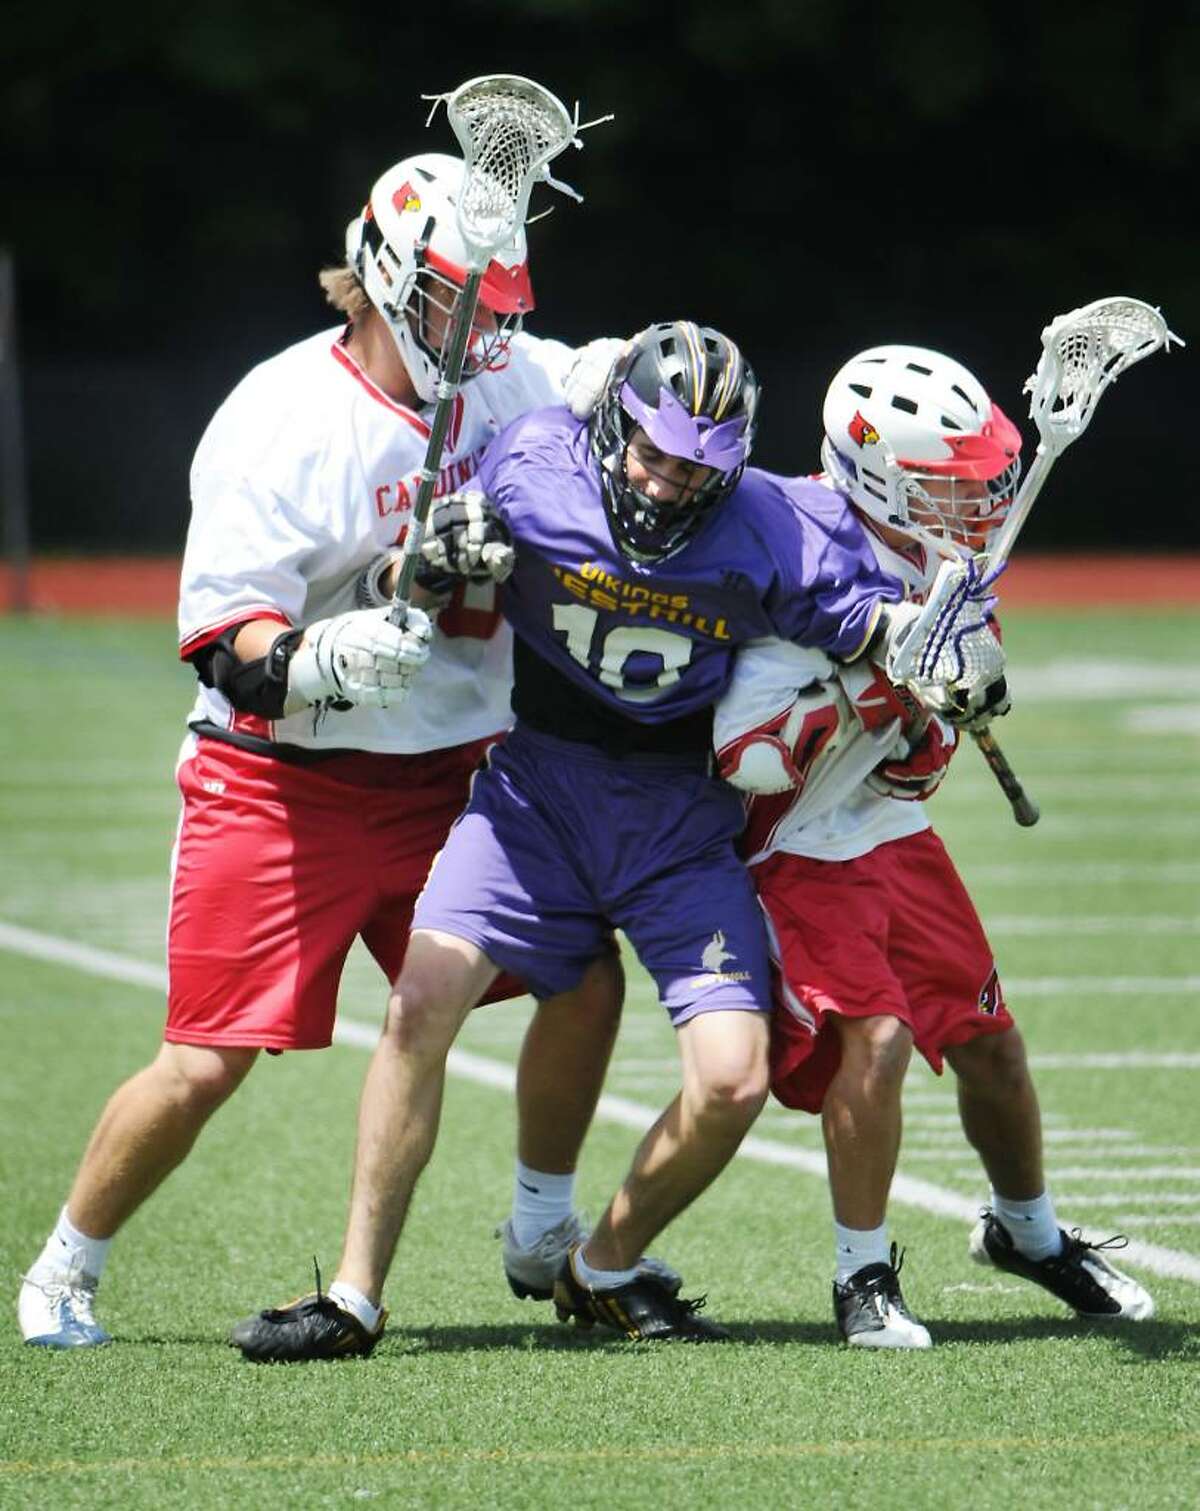 Westhill High School's Tom McCartney is pressurd by Greenwich High School's Todd Stafford and Jake Stein in boys lacrosse action in Greenwich, Conn. on Saturday May 15, 2010.